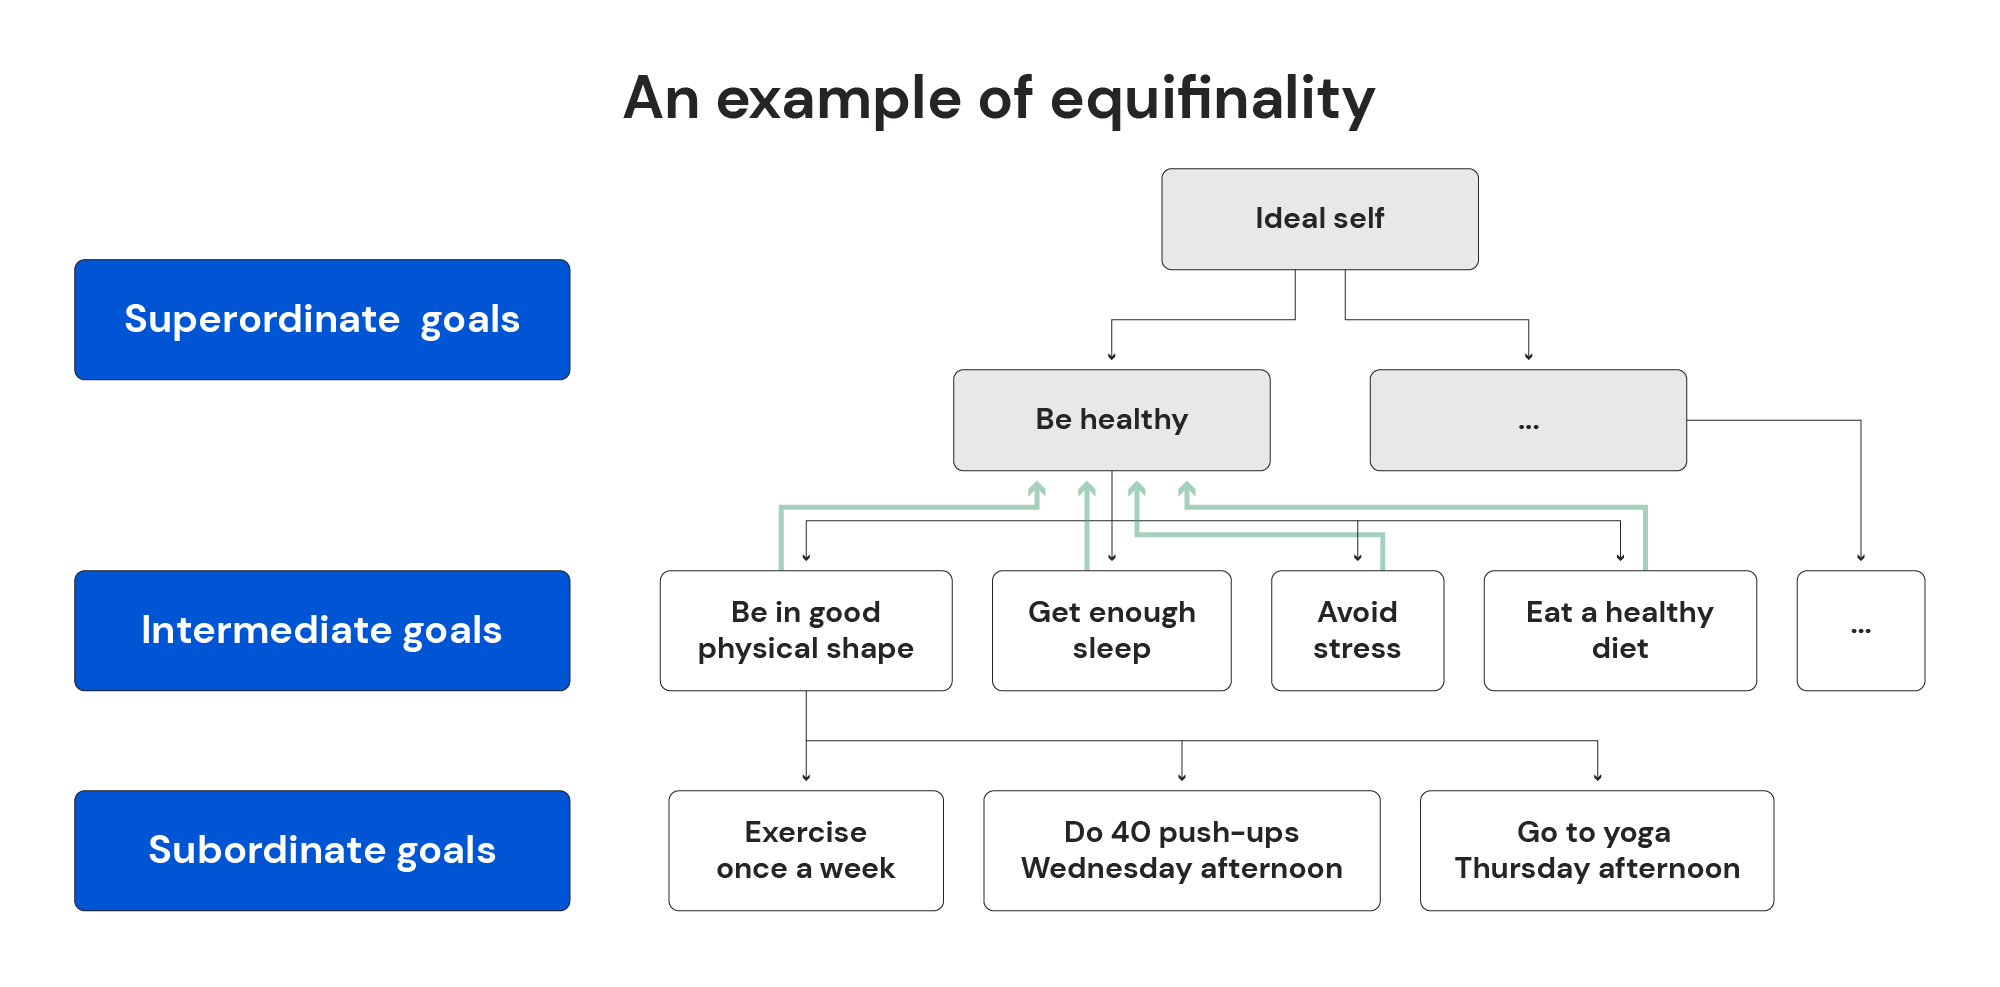 An example of equifinality